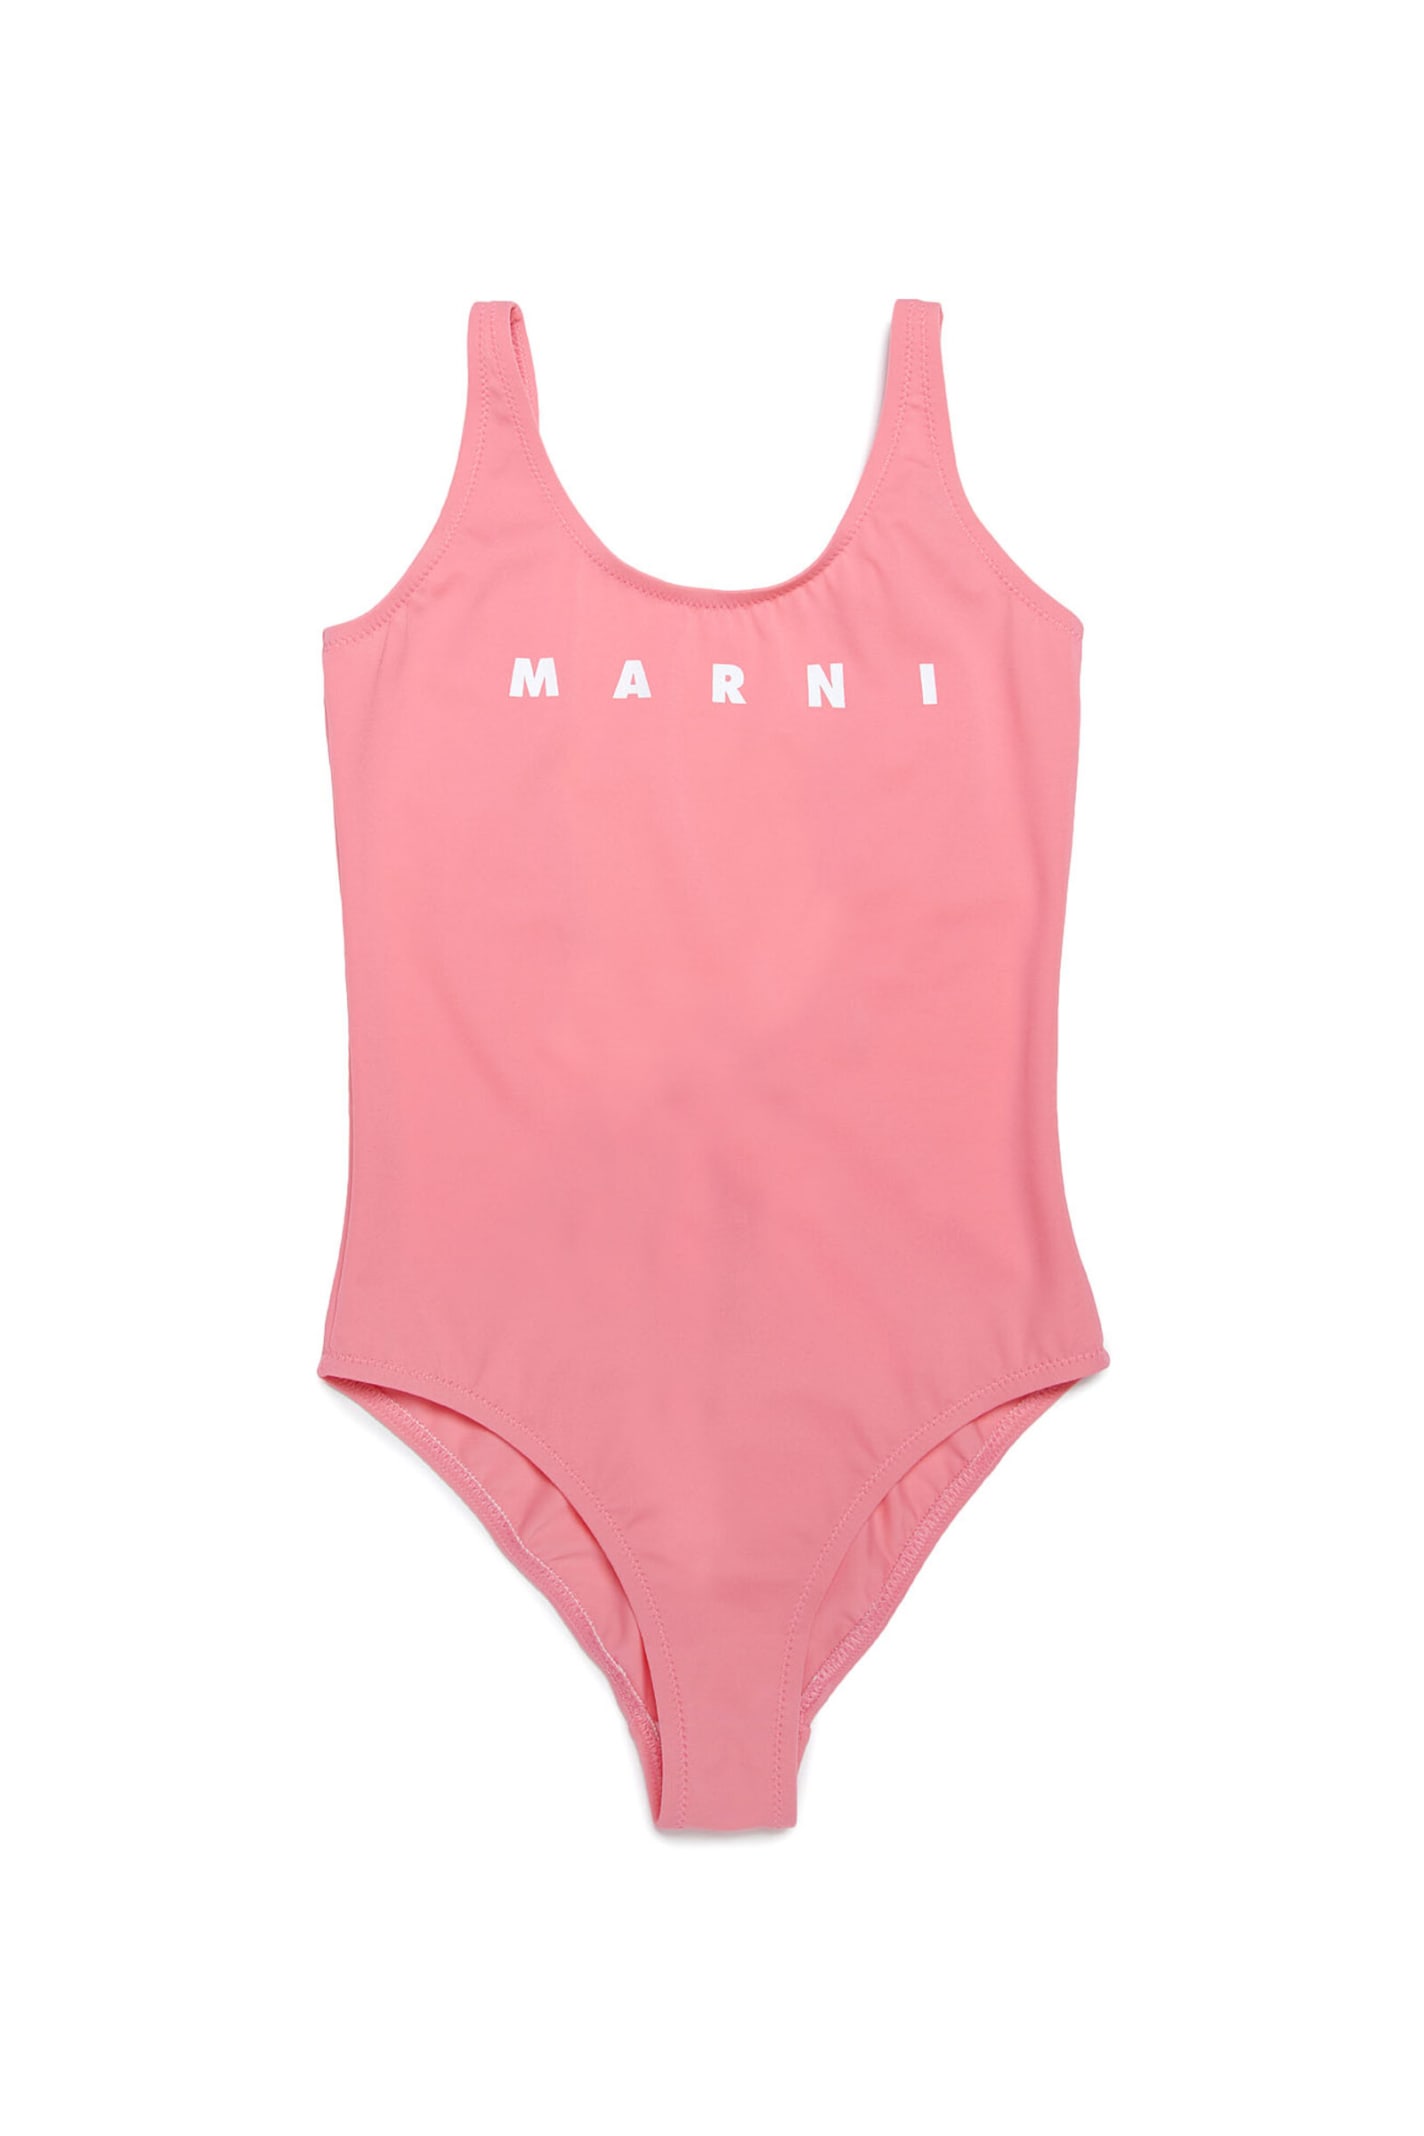 MARNI MM9F SWIMSUIT MARNI PEACHY PINK ONE-PIECE SWIMMING COSTUME IN LYCRA WITH LOGO